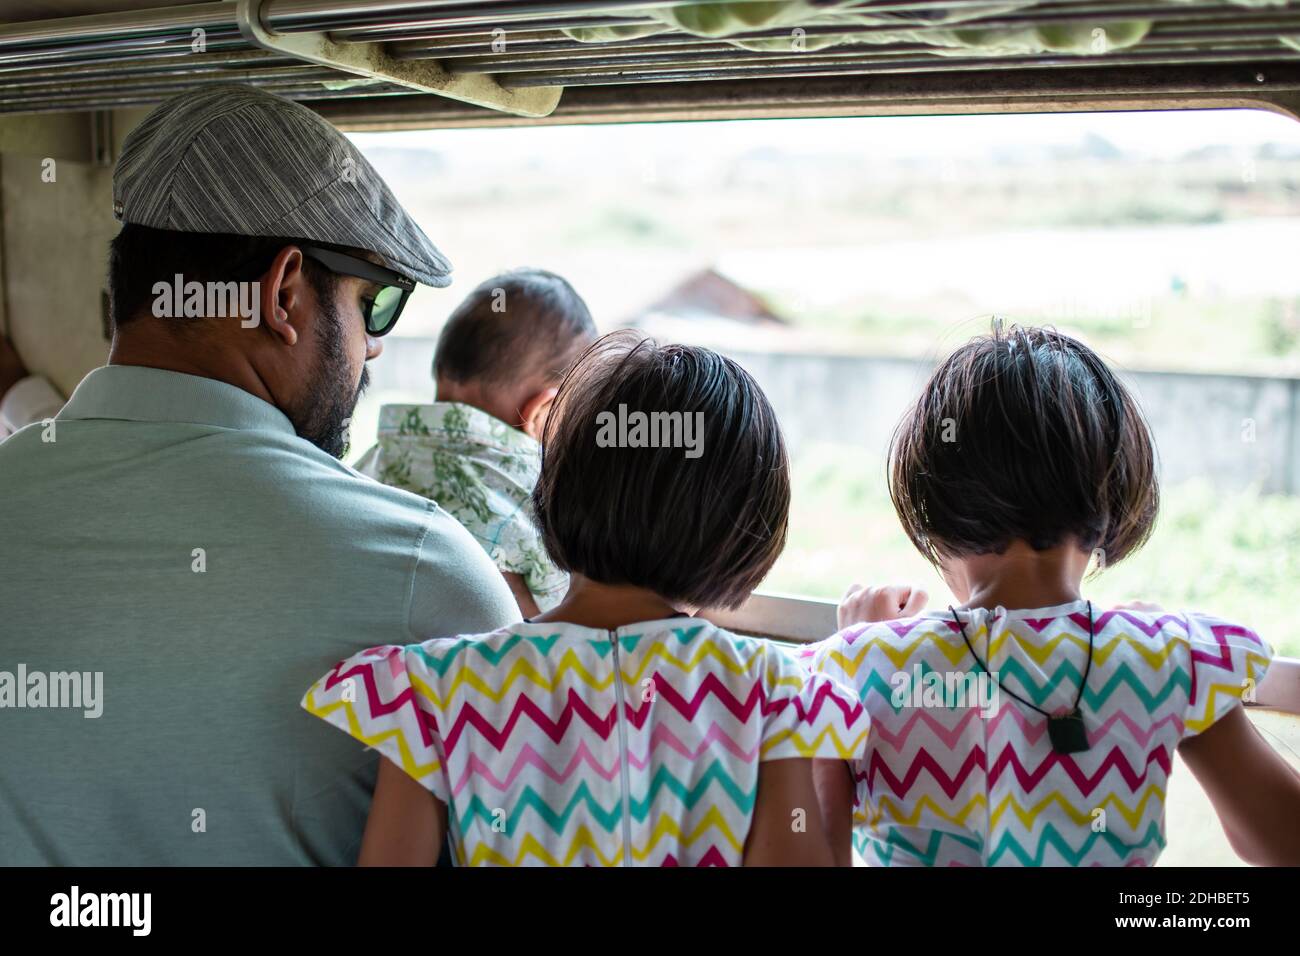 Yangon, Myanmar - December 31, 2019: A family  looks out over the view from the traditional circle train in Yangon Stock Photo